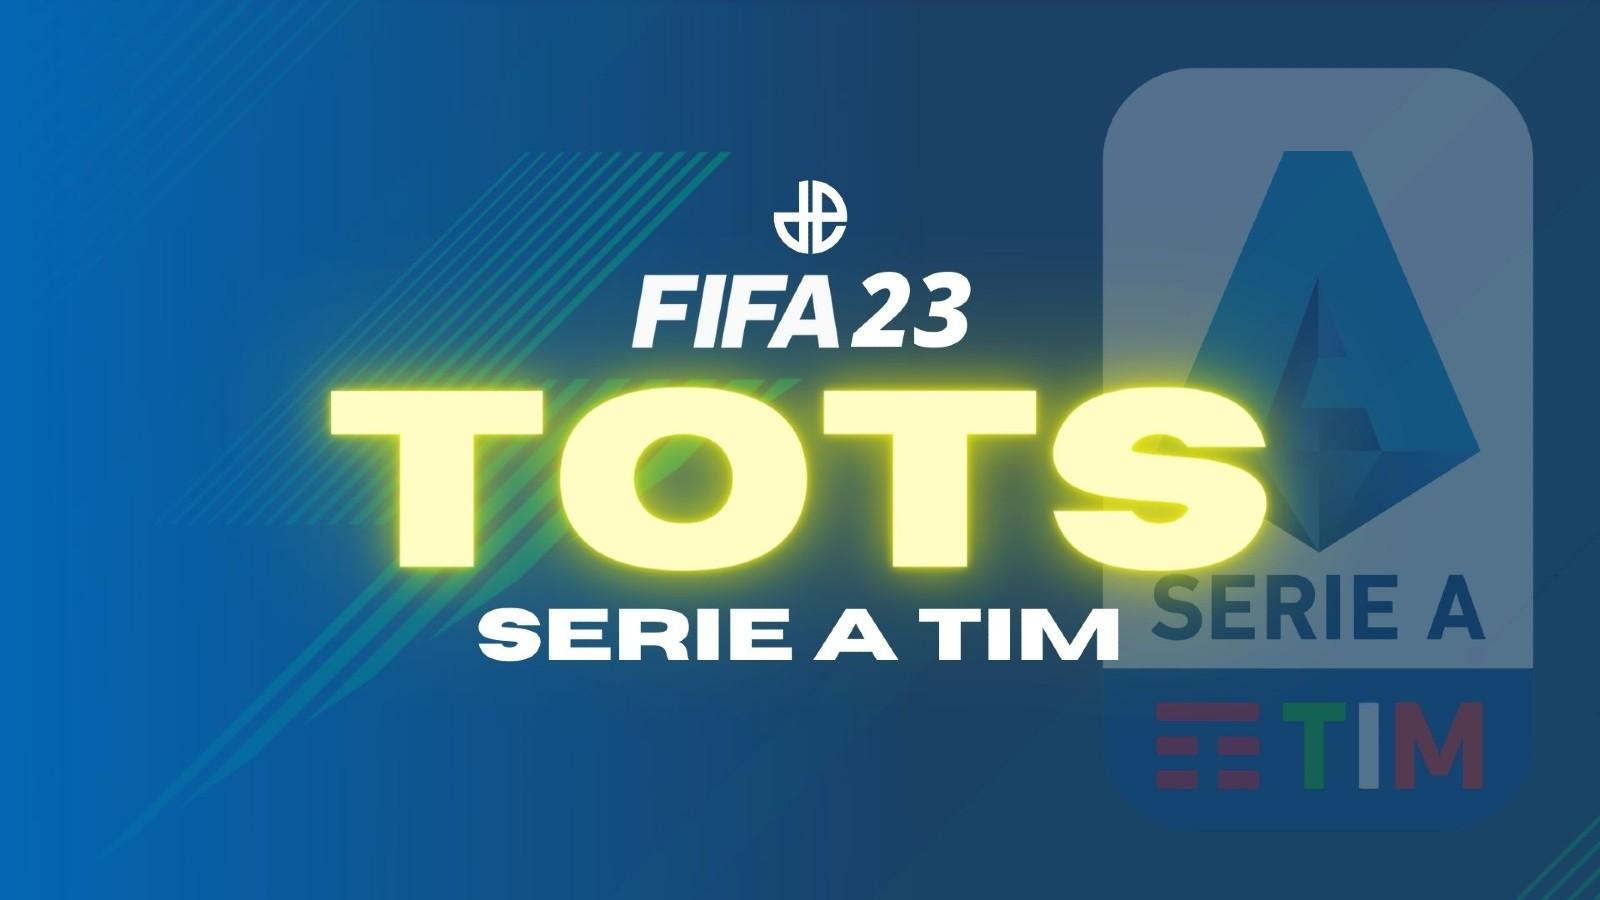 Graphic for the FIFA 23 Serie A TOTS